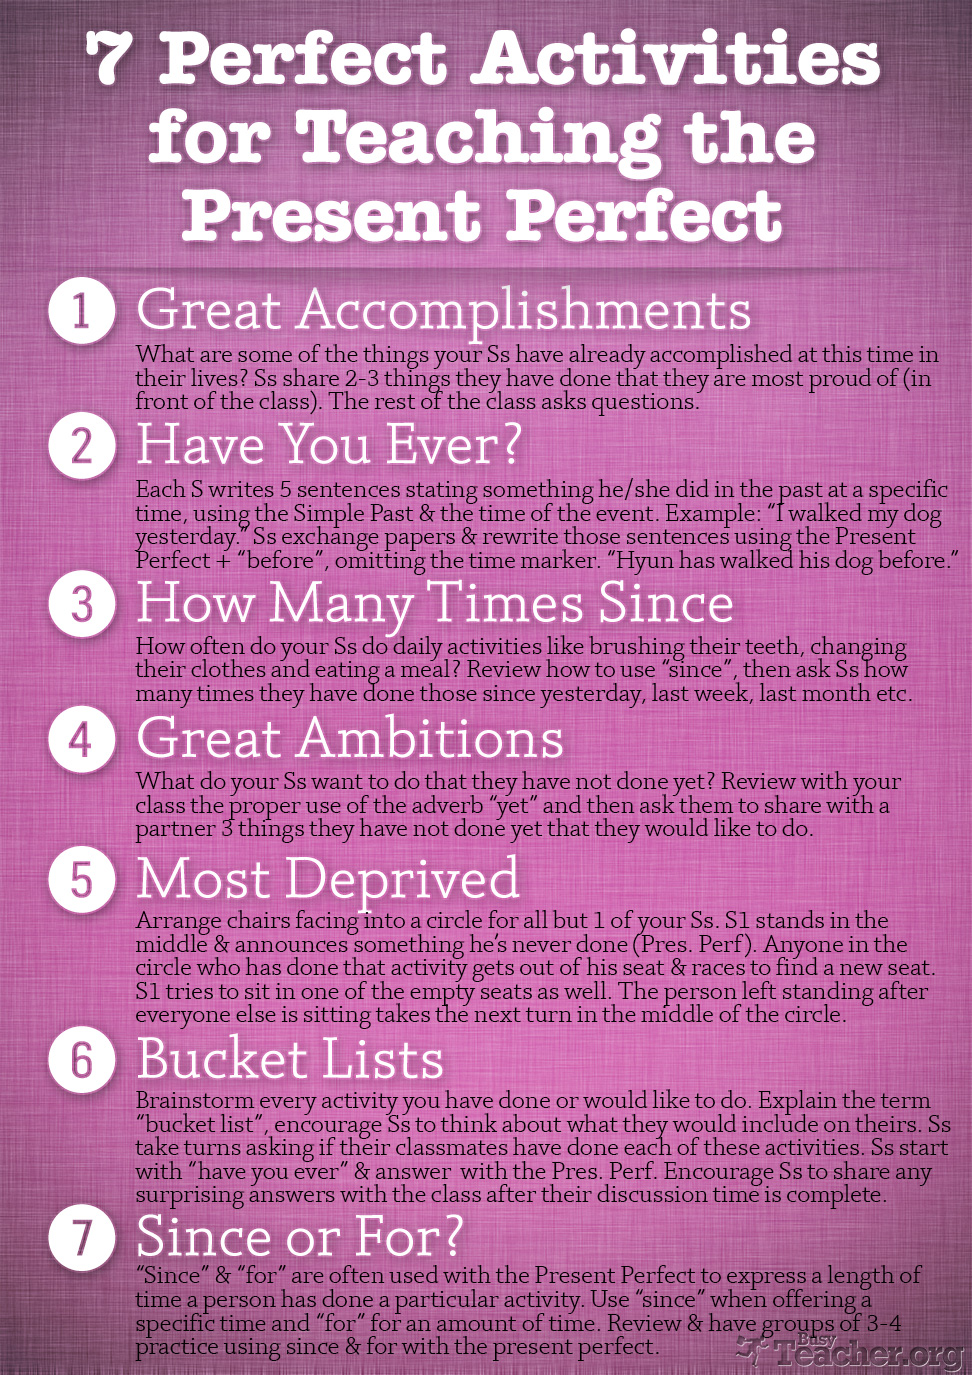 7 Perfect Activities to Teach the Present Perfect: Poster